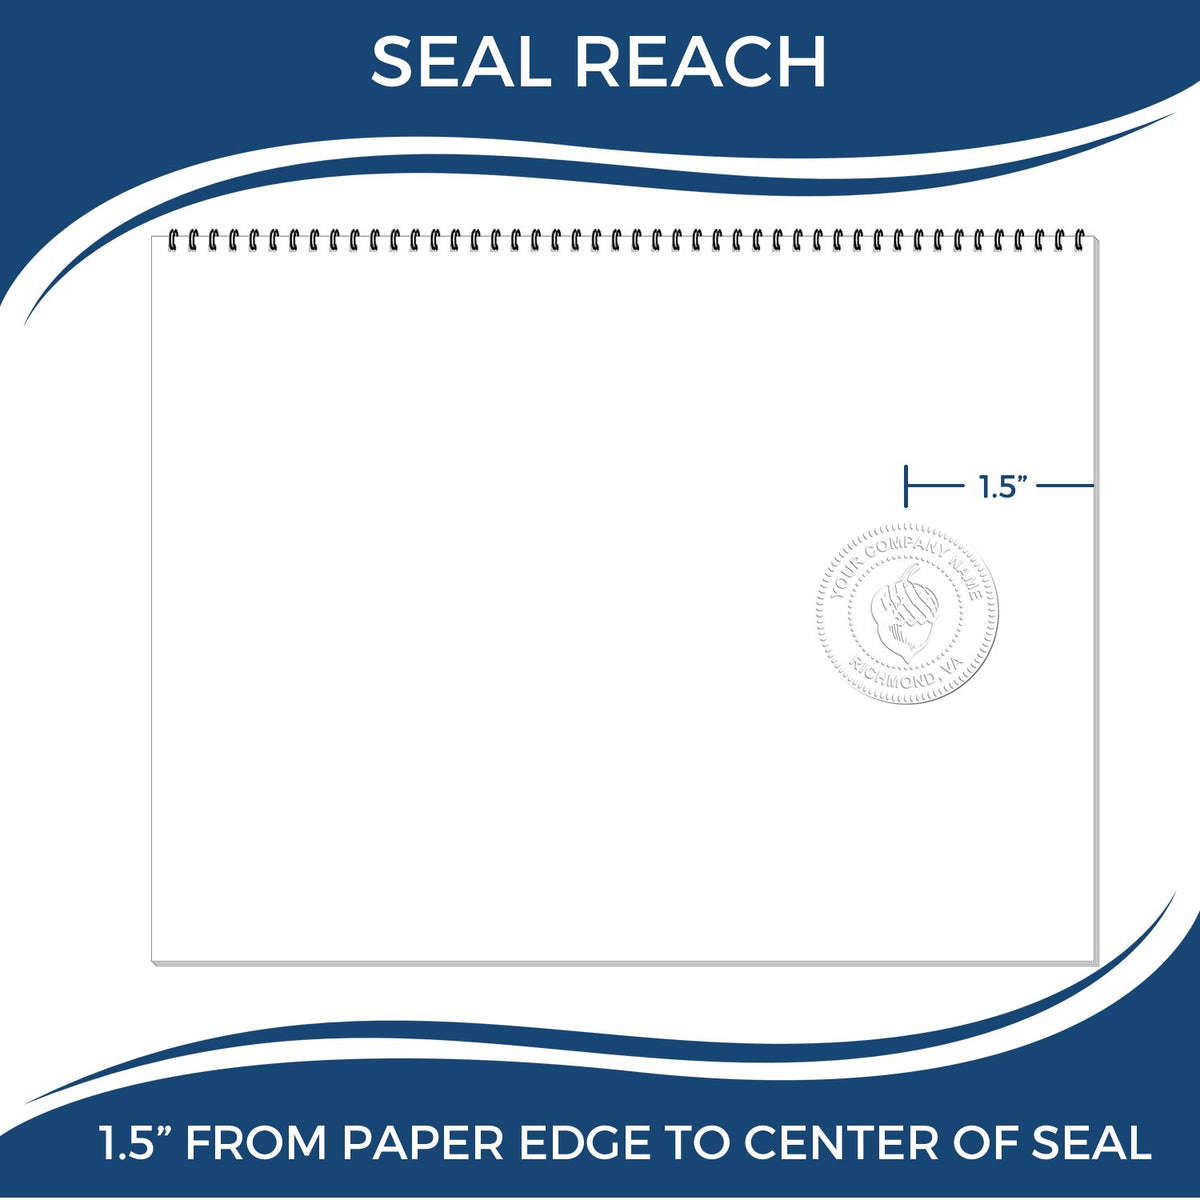 An infographic showing the seal reach which is represented by a ruler and a miniature seal image of the Alaska Geologist Desk Seal